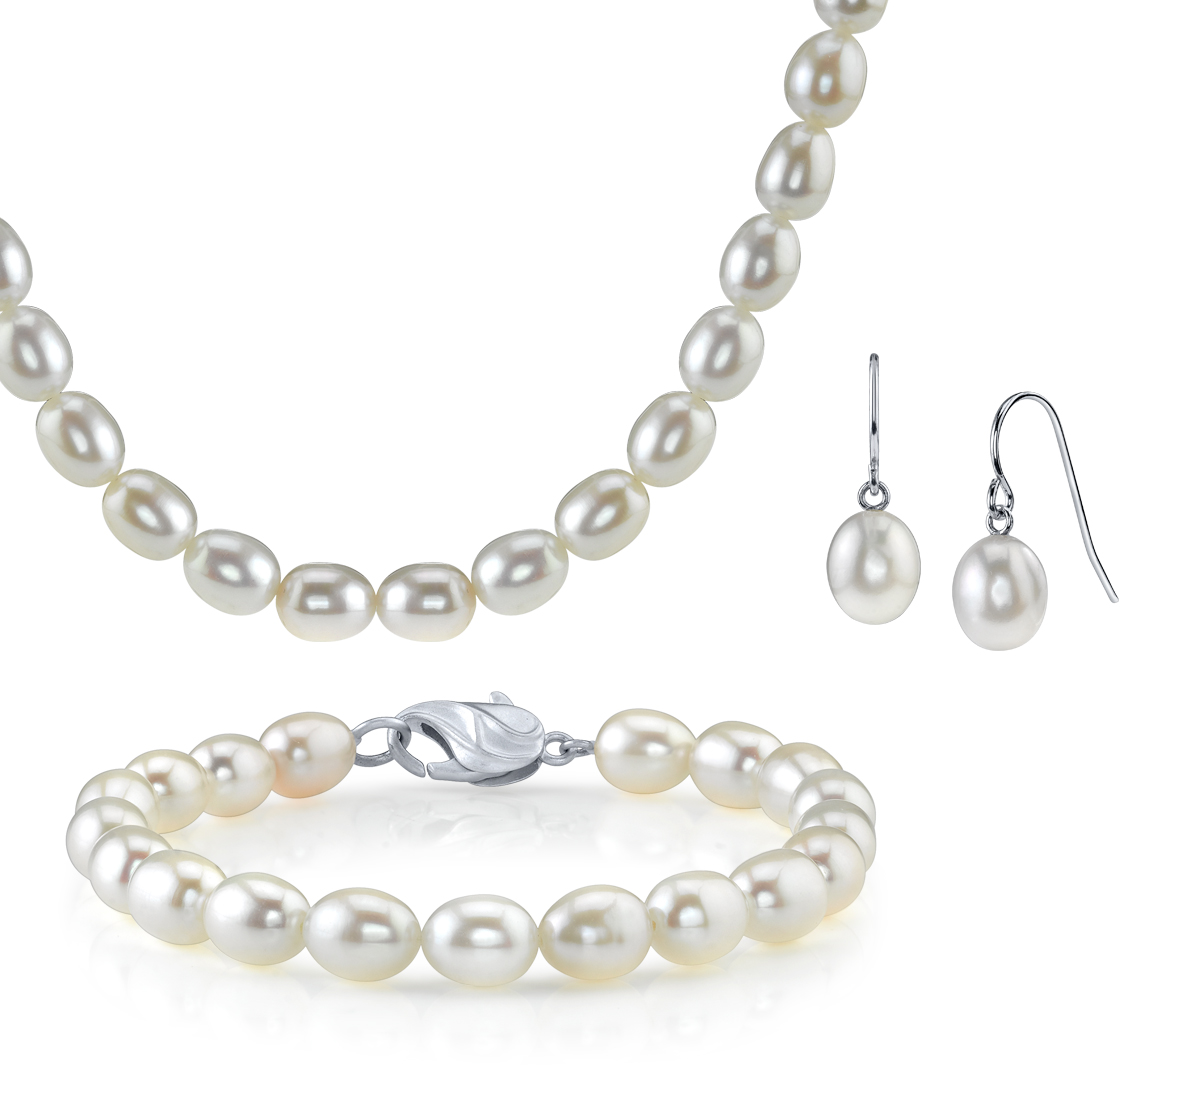 How to Choose Your Wedding Jewelry - Robbins Brothers Blog